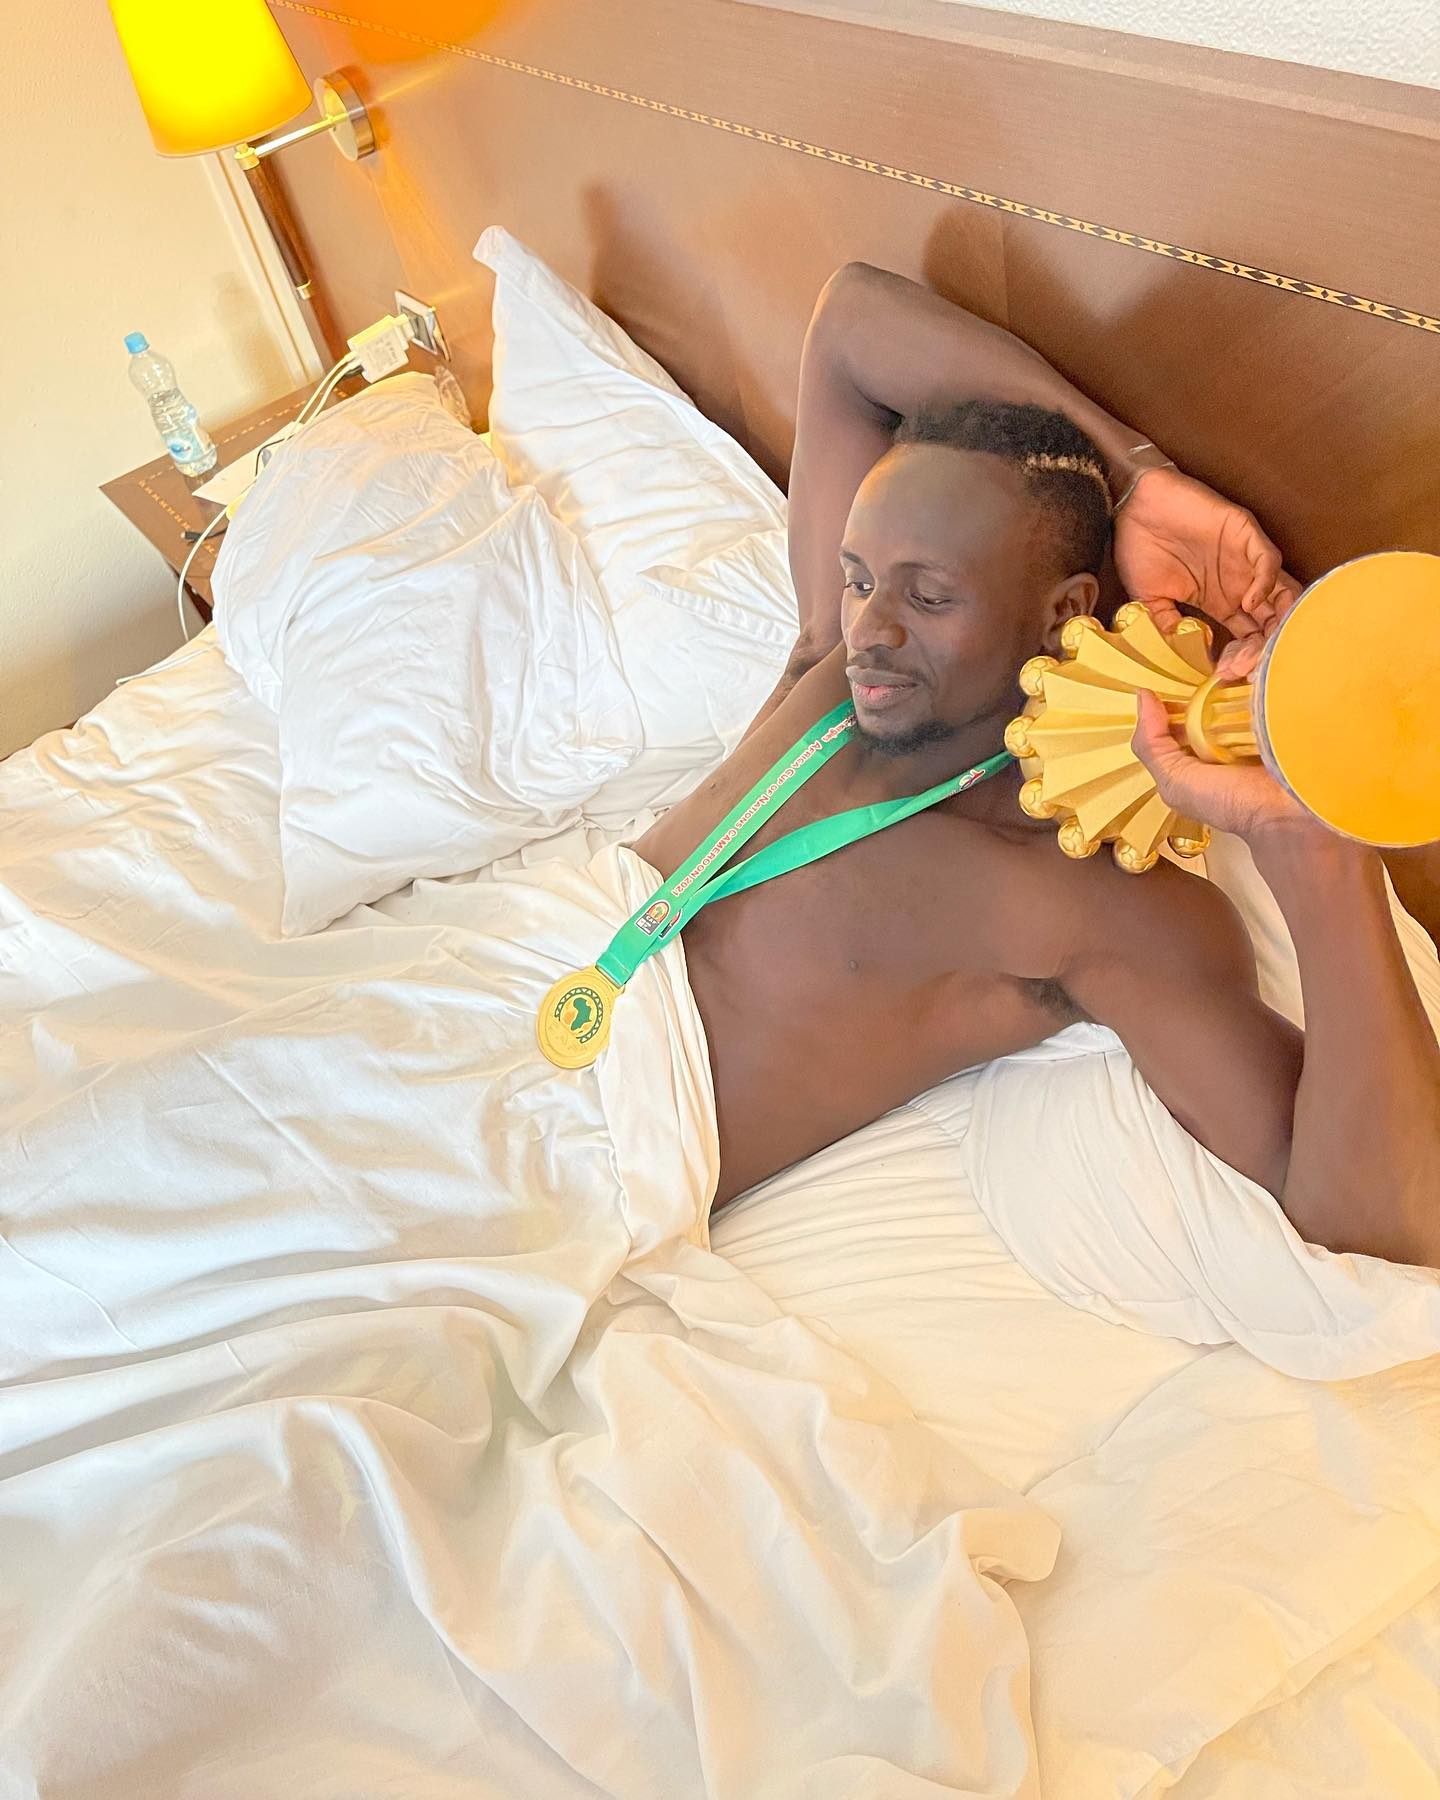 pp.Sadio Mane: Liverpool conductor cradles the trophy in his sleep, celebrating Senegal's glorious Afcon victory, delighting fans.p - LifeAnimal